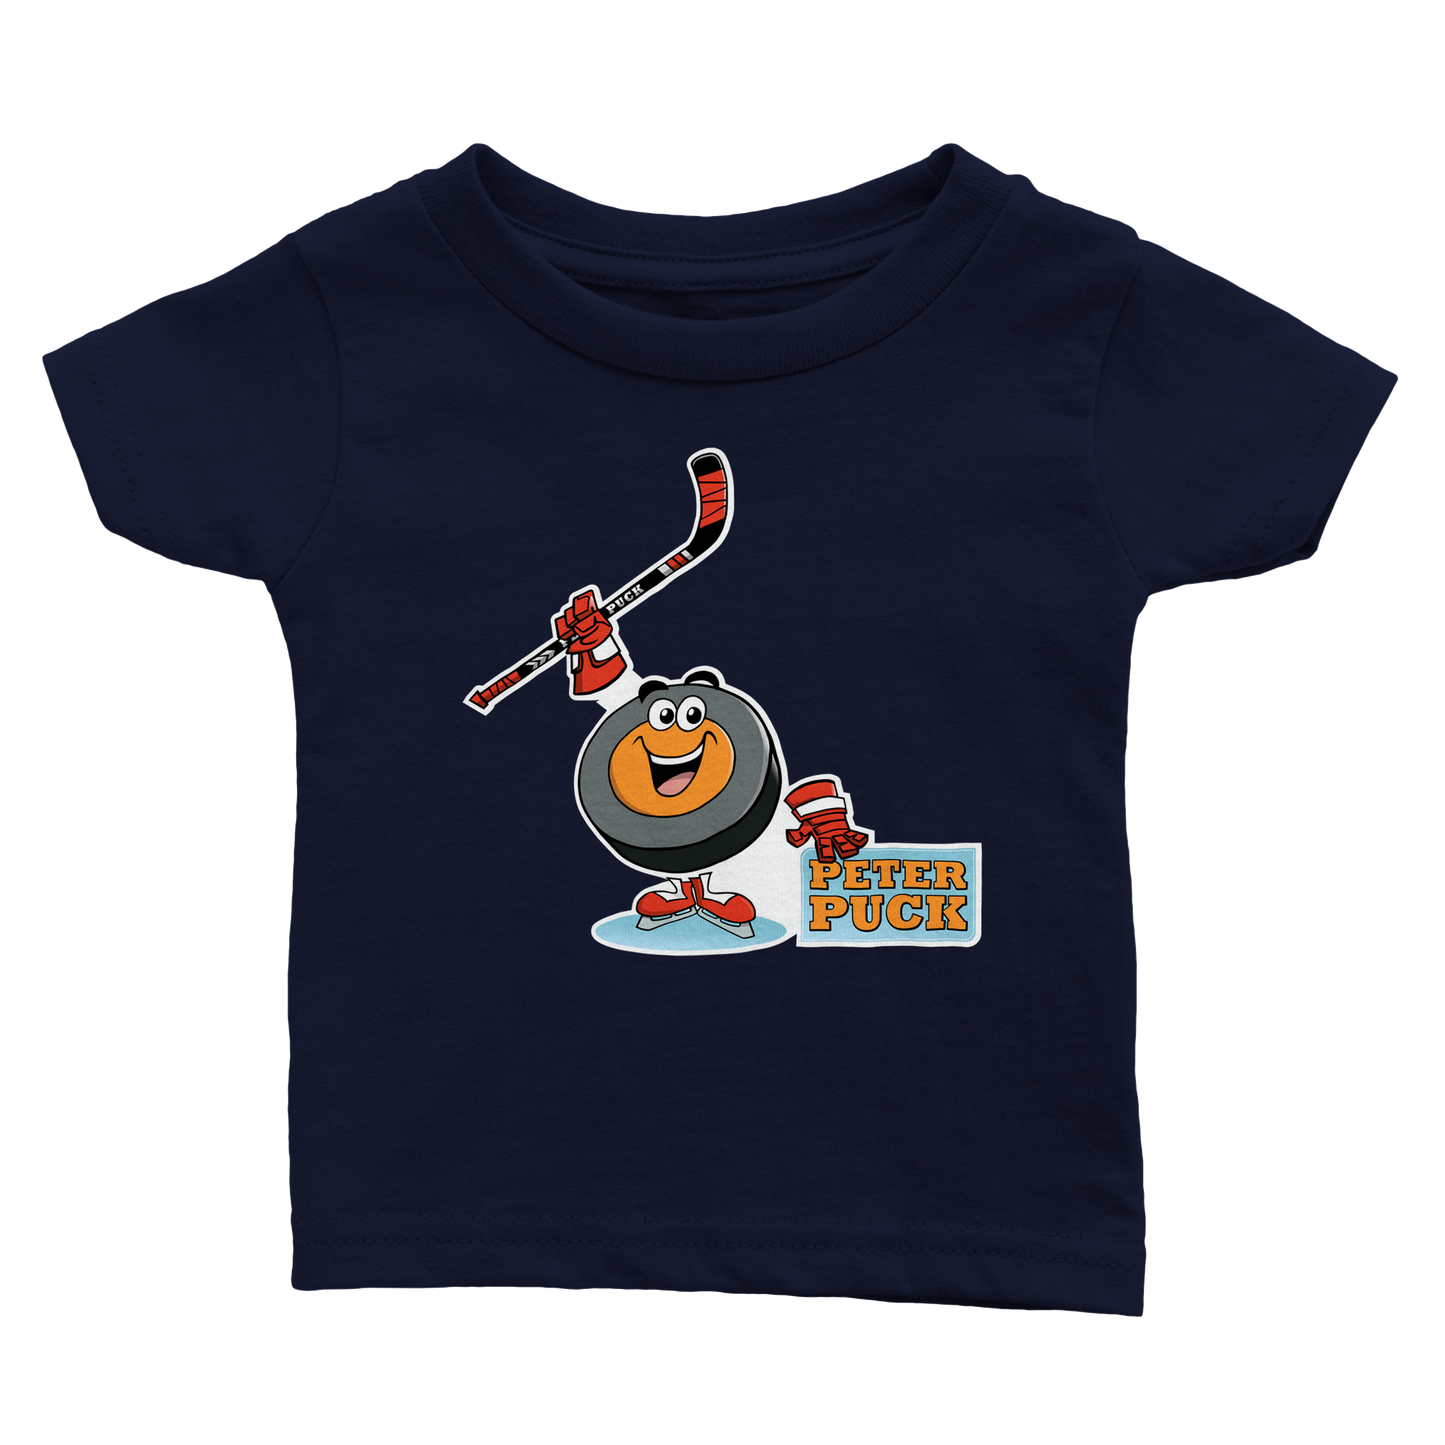 Peter Puck Celly Classic Baby Crewneck T-shirt